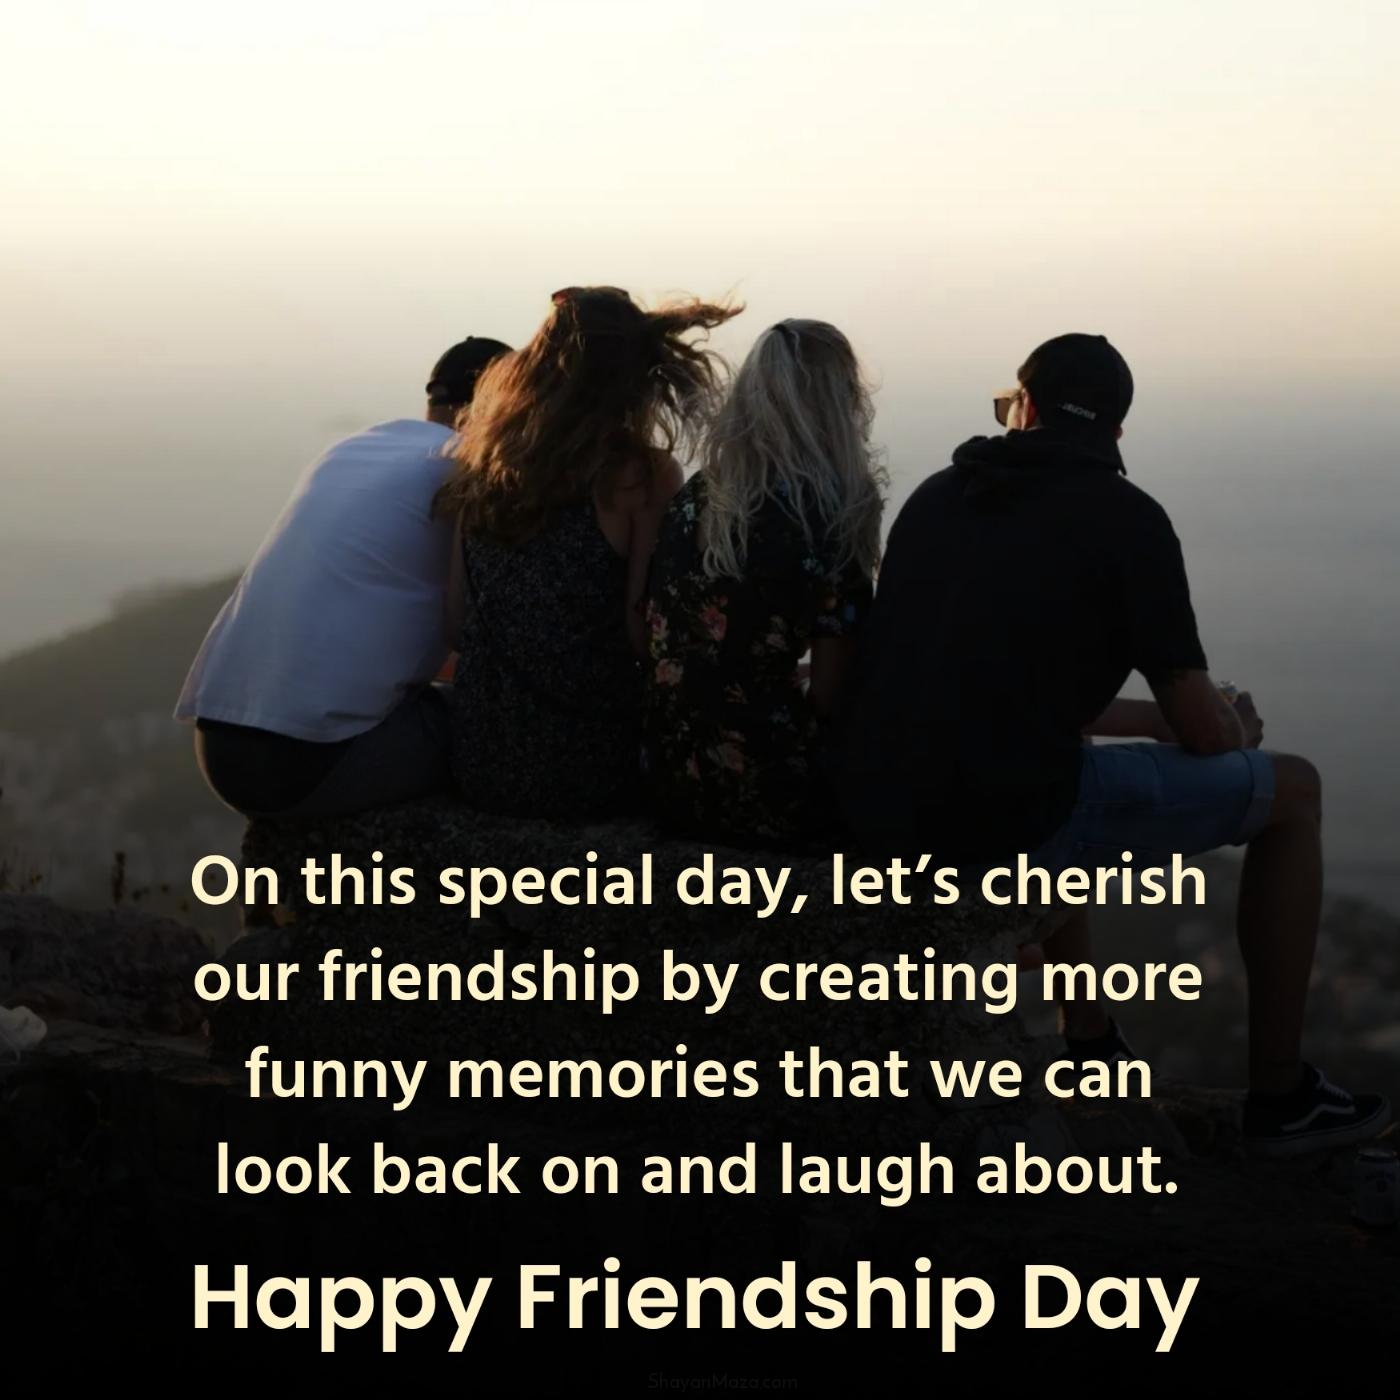 On this special day lets cherish our friendship by creating more funny memories